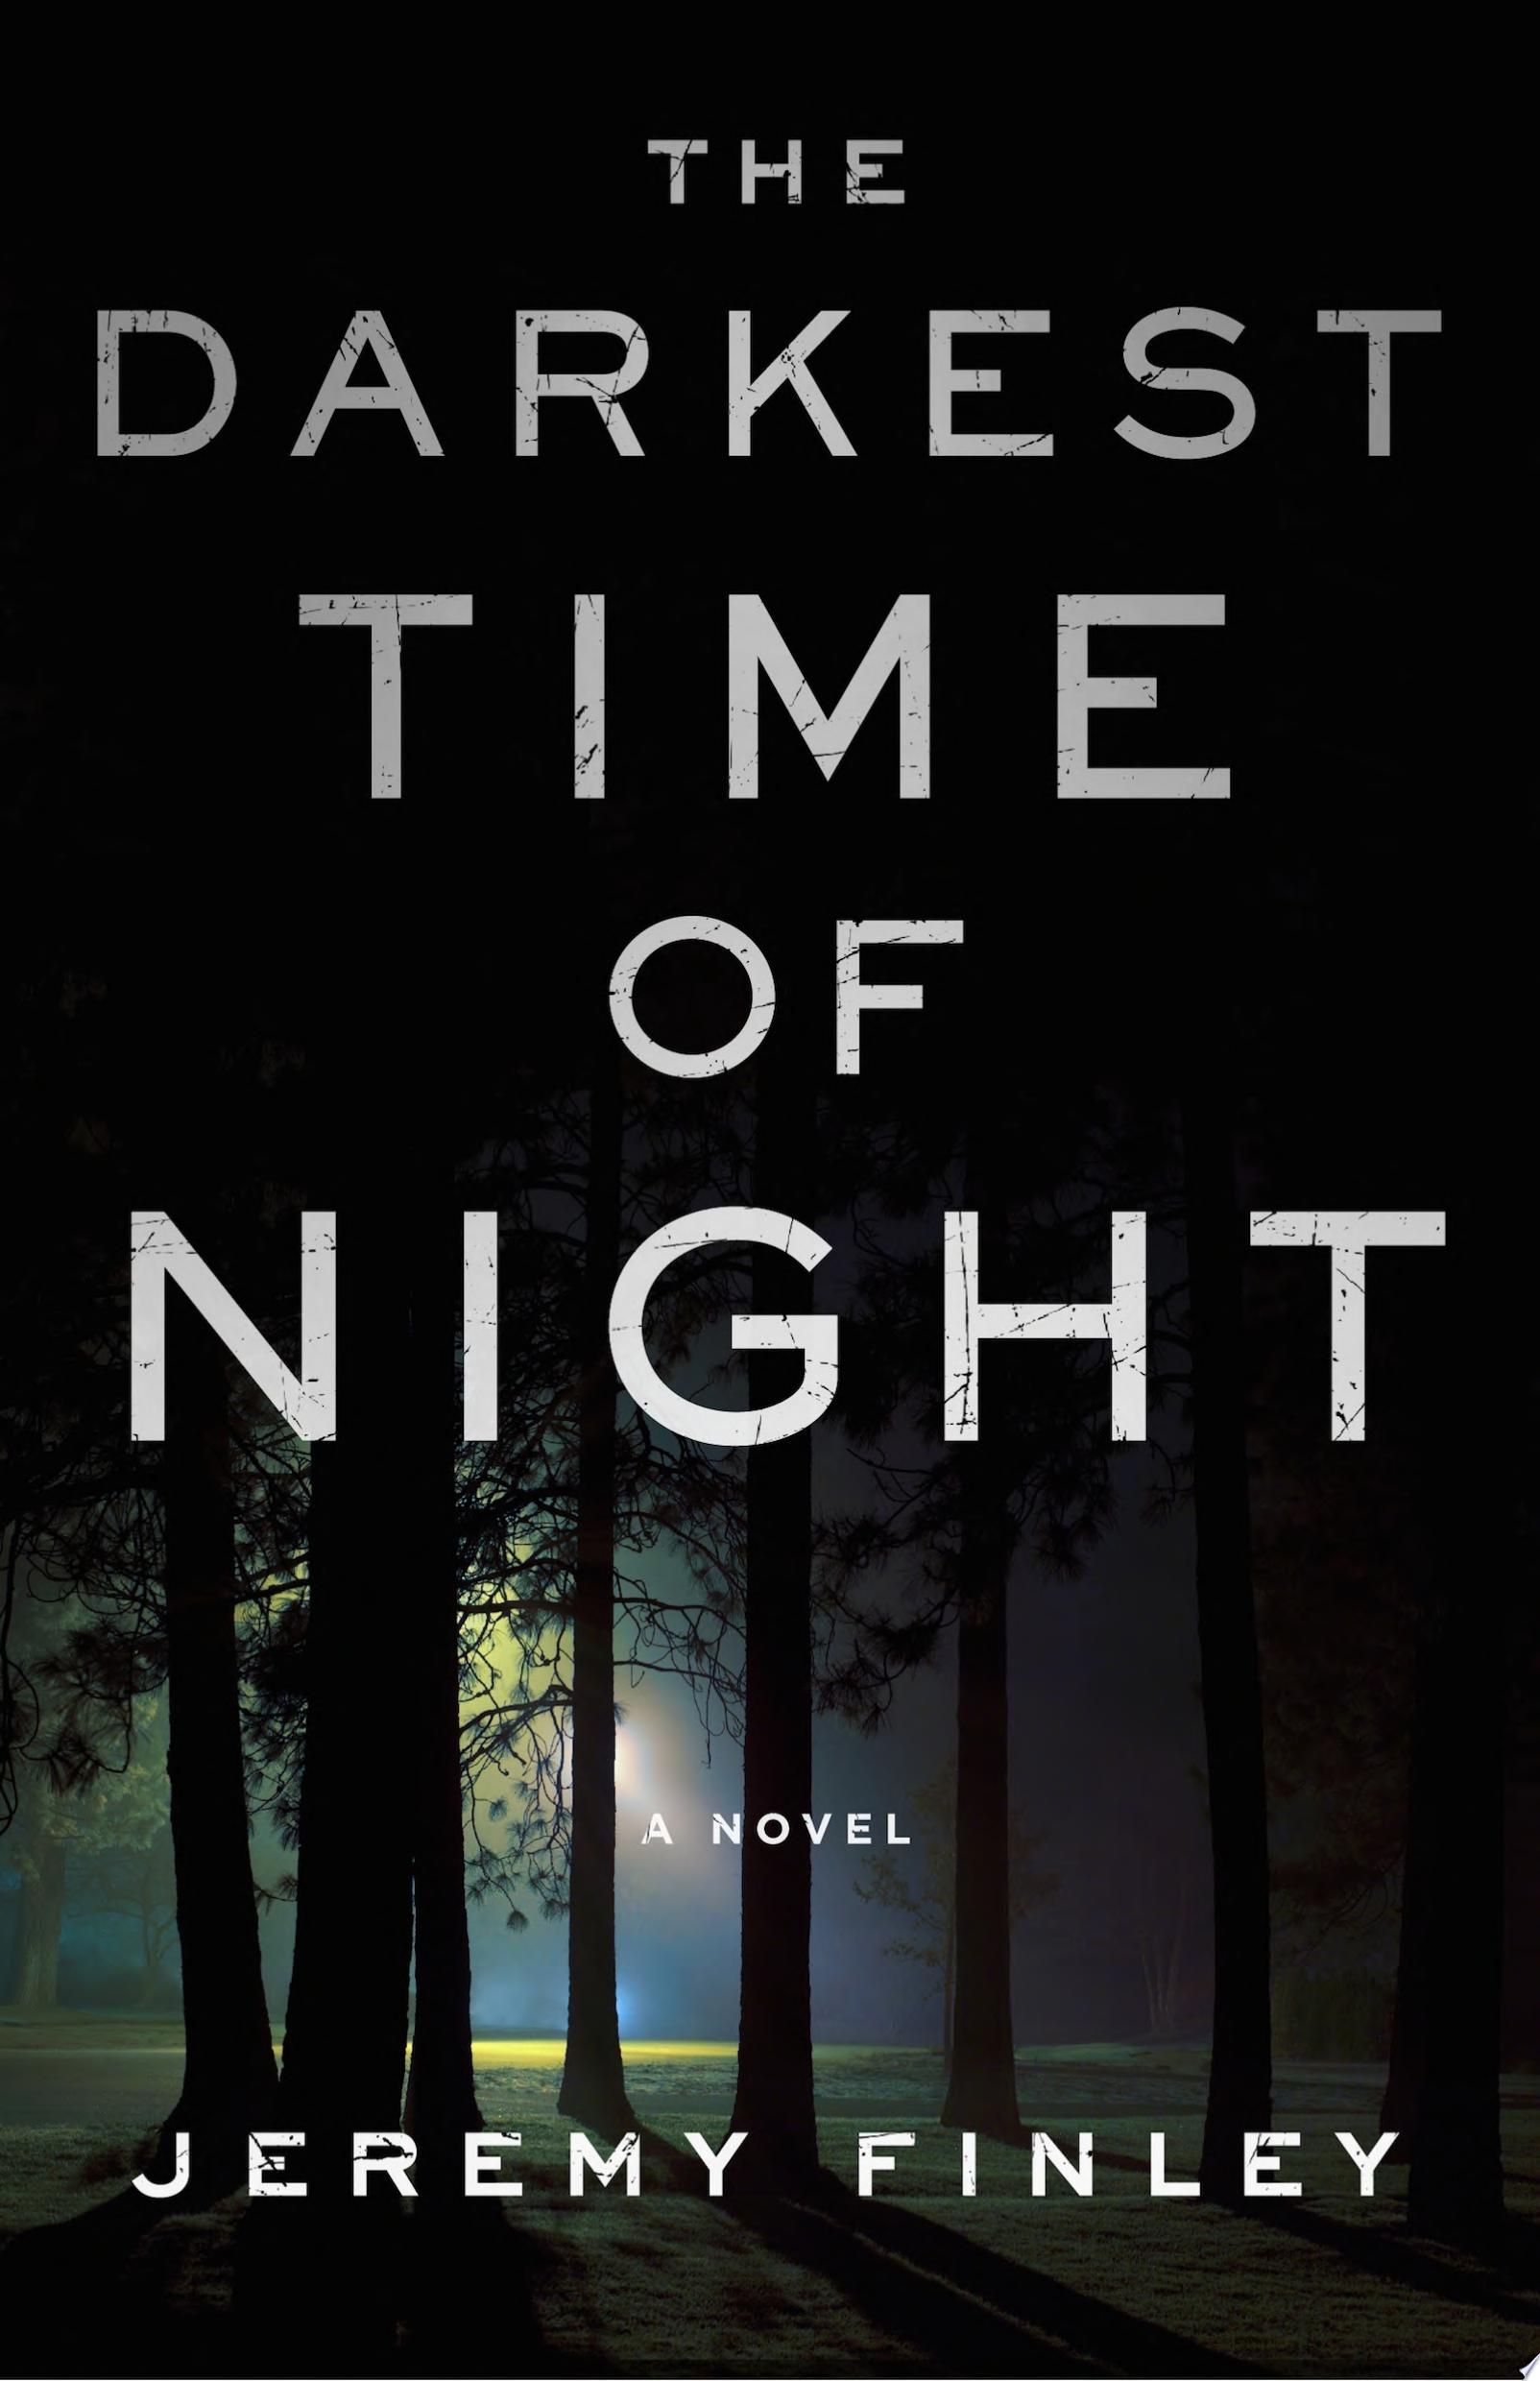 Image for "The Darkest Time of Night"